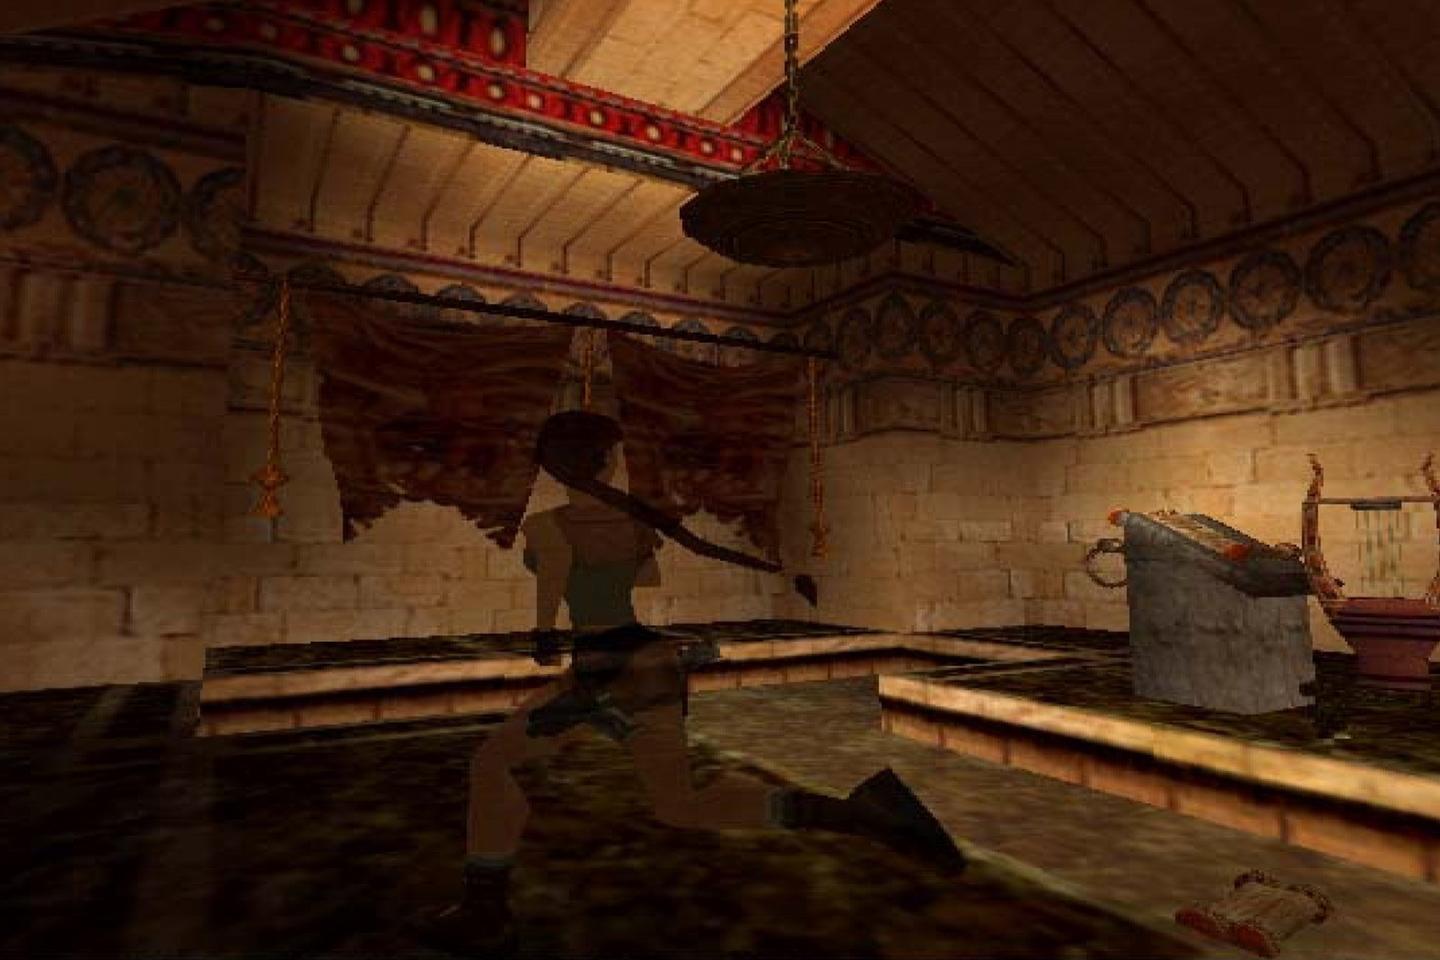 Lara Croft with a shotgun in a temple-like room reflected in the water below.